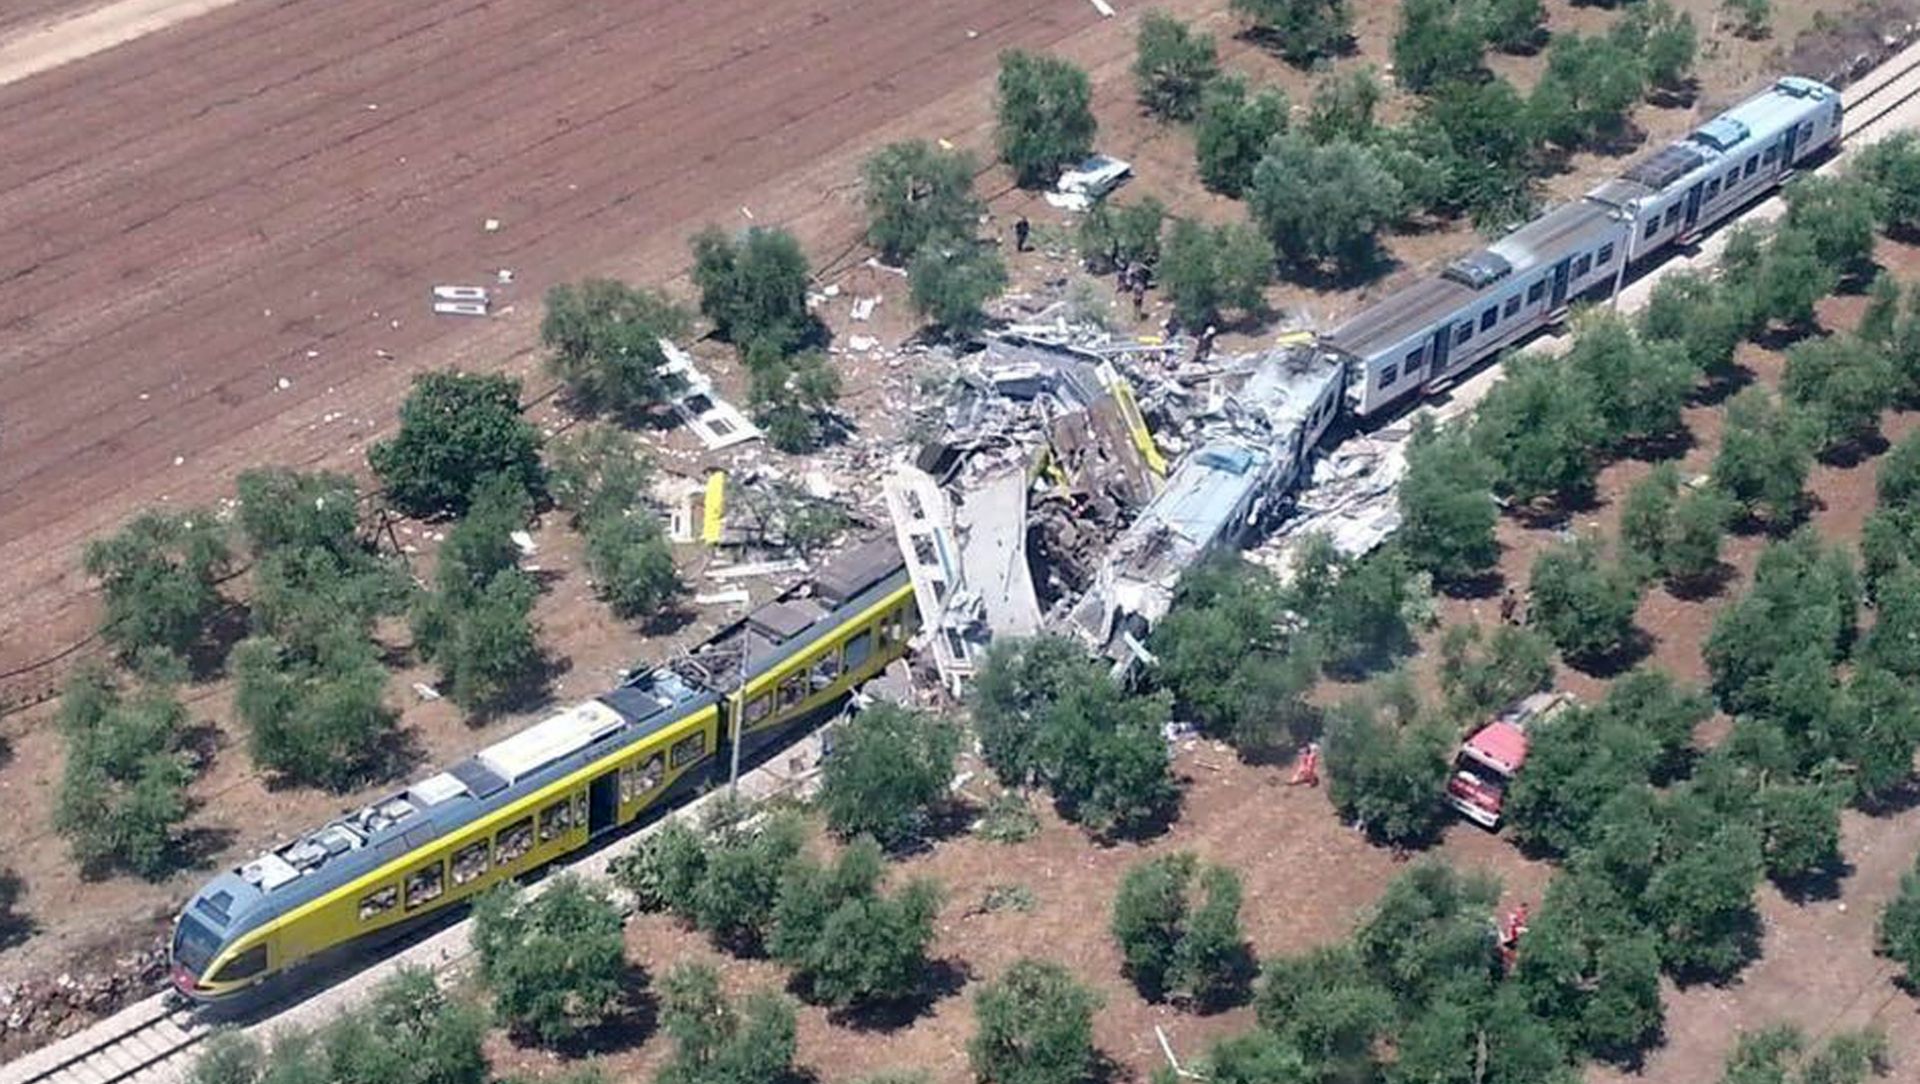 epa05421608 A handout picture provided by the Italian Fire Brigade on 12 July 2016 shows the crash site where two trains collided on a single-track stretch between Ruvo di Puglia and Corato, southern Italy, 12 July 2016. A least ten people have been killed and dozens injured according to reports.  EPA/ITALIAN FIRE BRIGADE / HANDOUT  HANDOUT EDITORIAL USE ONLY/NO SALES HANDOUT EDITORIAL USE ONLY/NO SALES